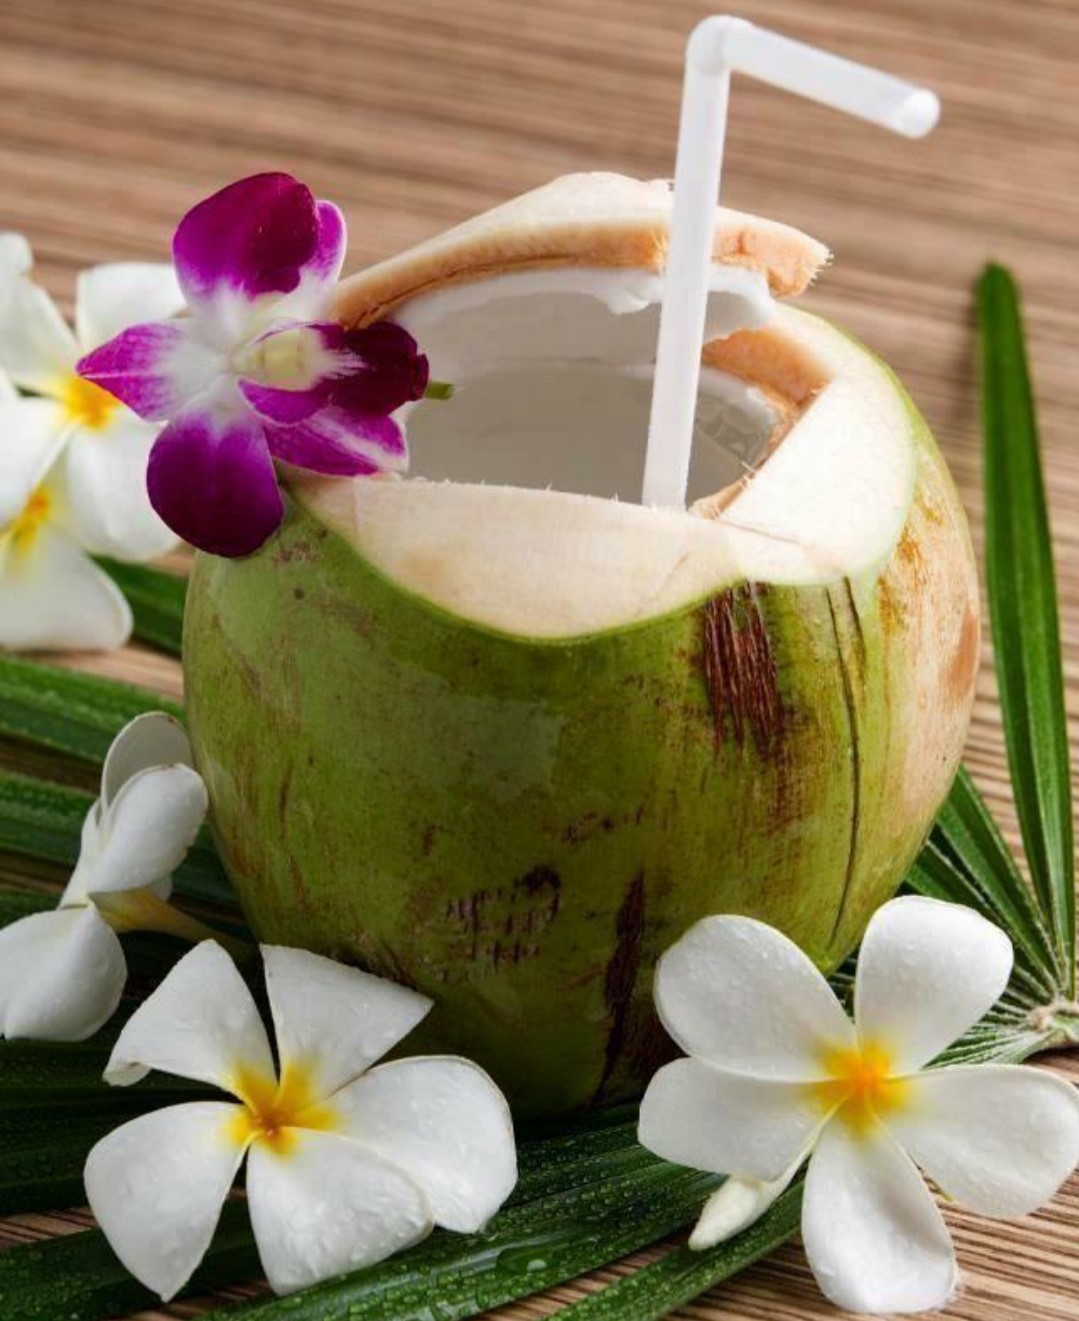 straw and flowers in coconut